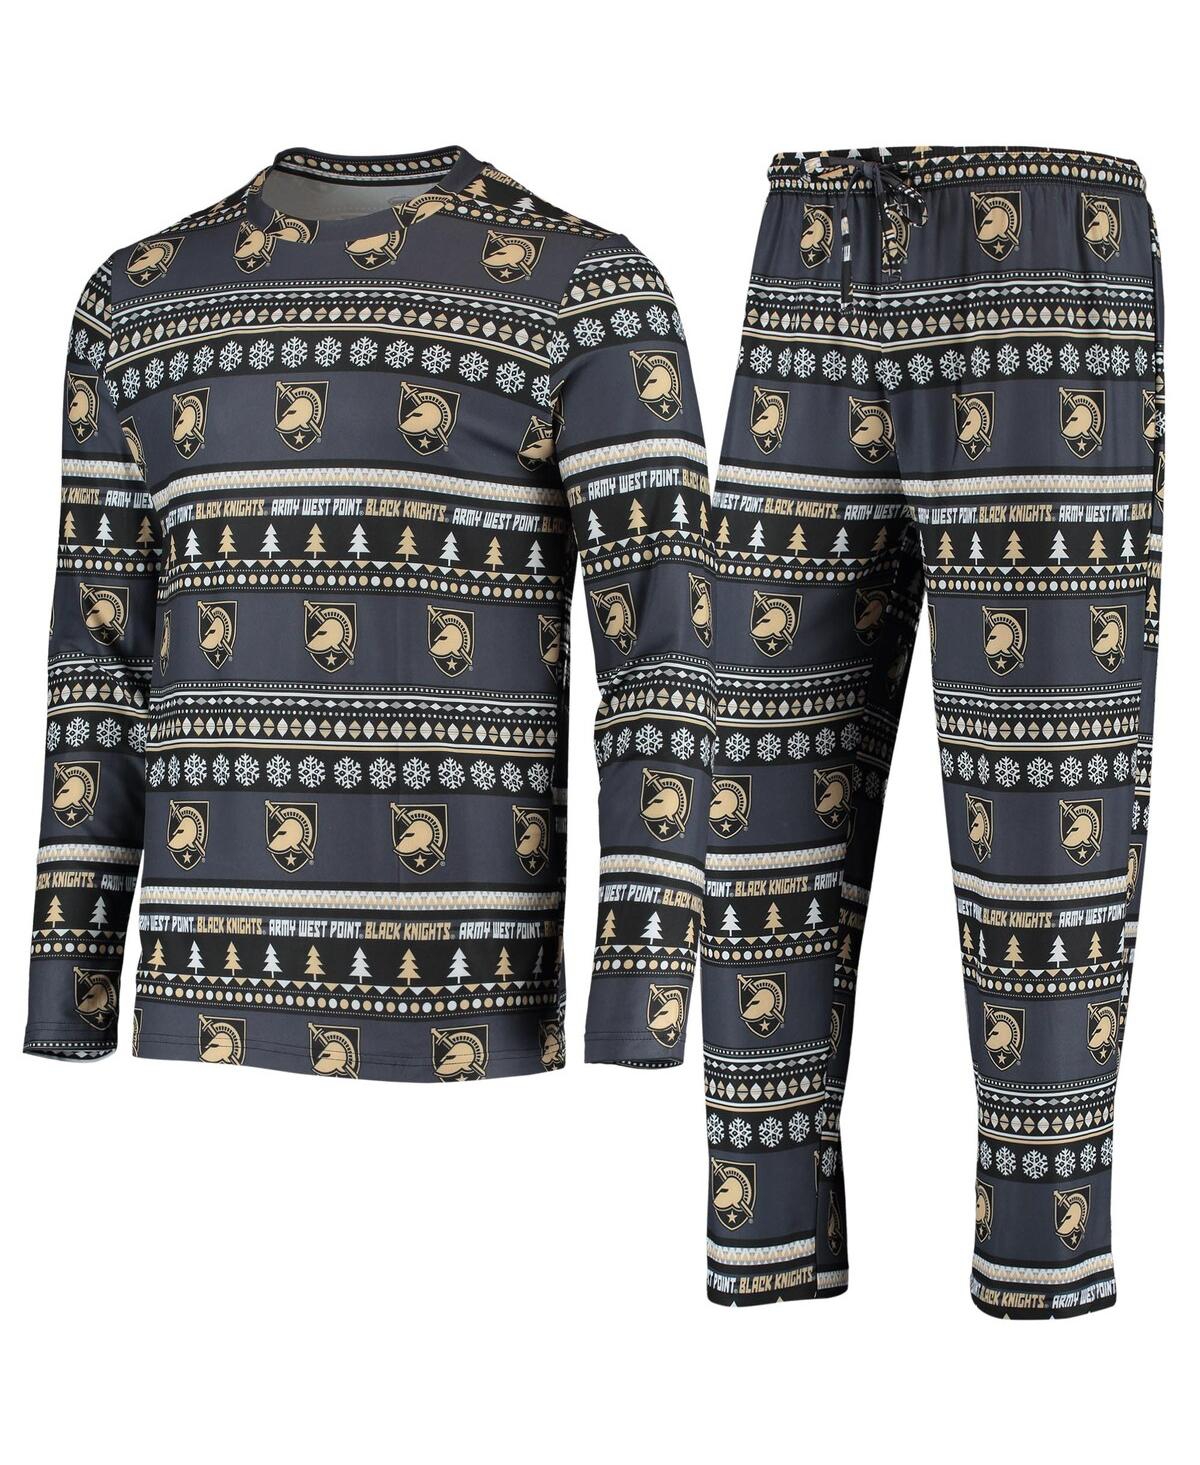 Men's Concepts Sport Black Army Black Knights Ugly Sweater Knit Long Sleeve Top and Pant Set - Black